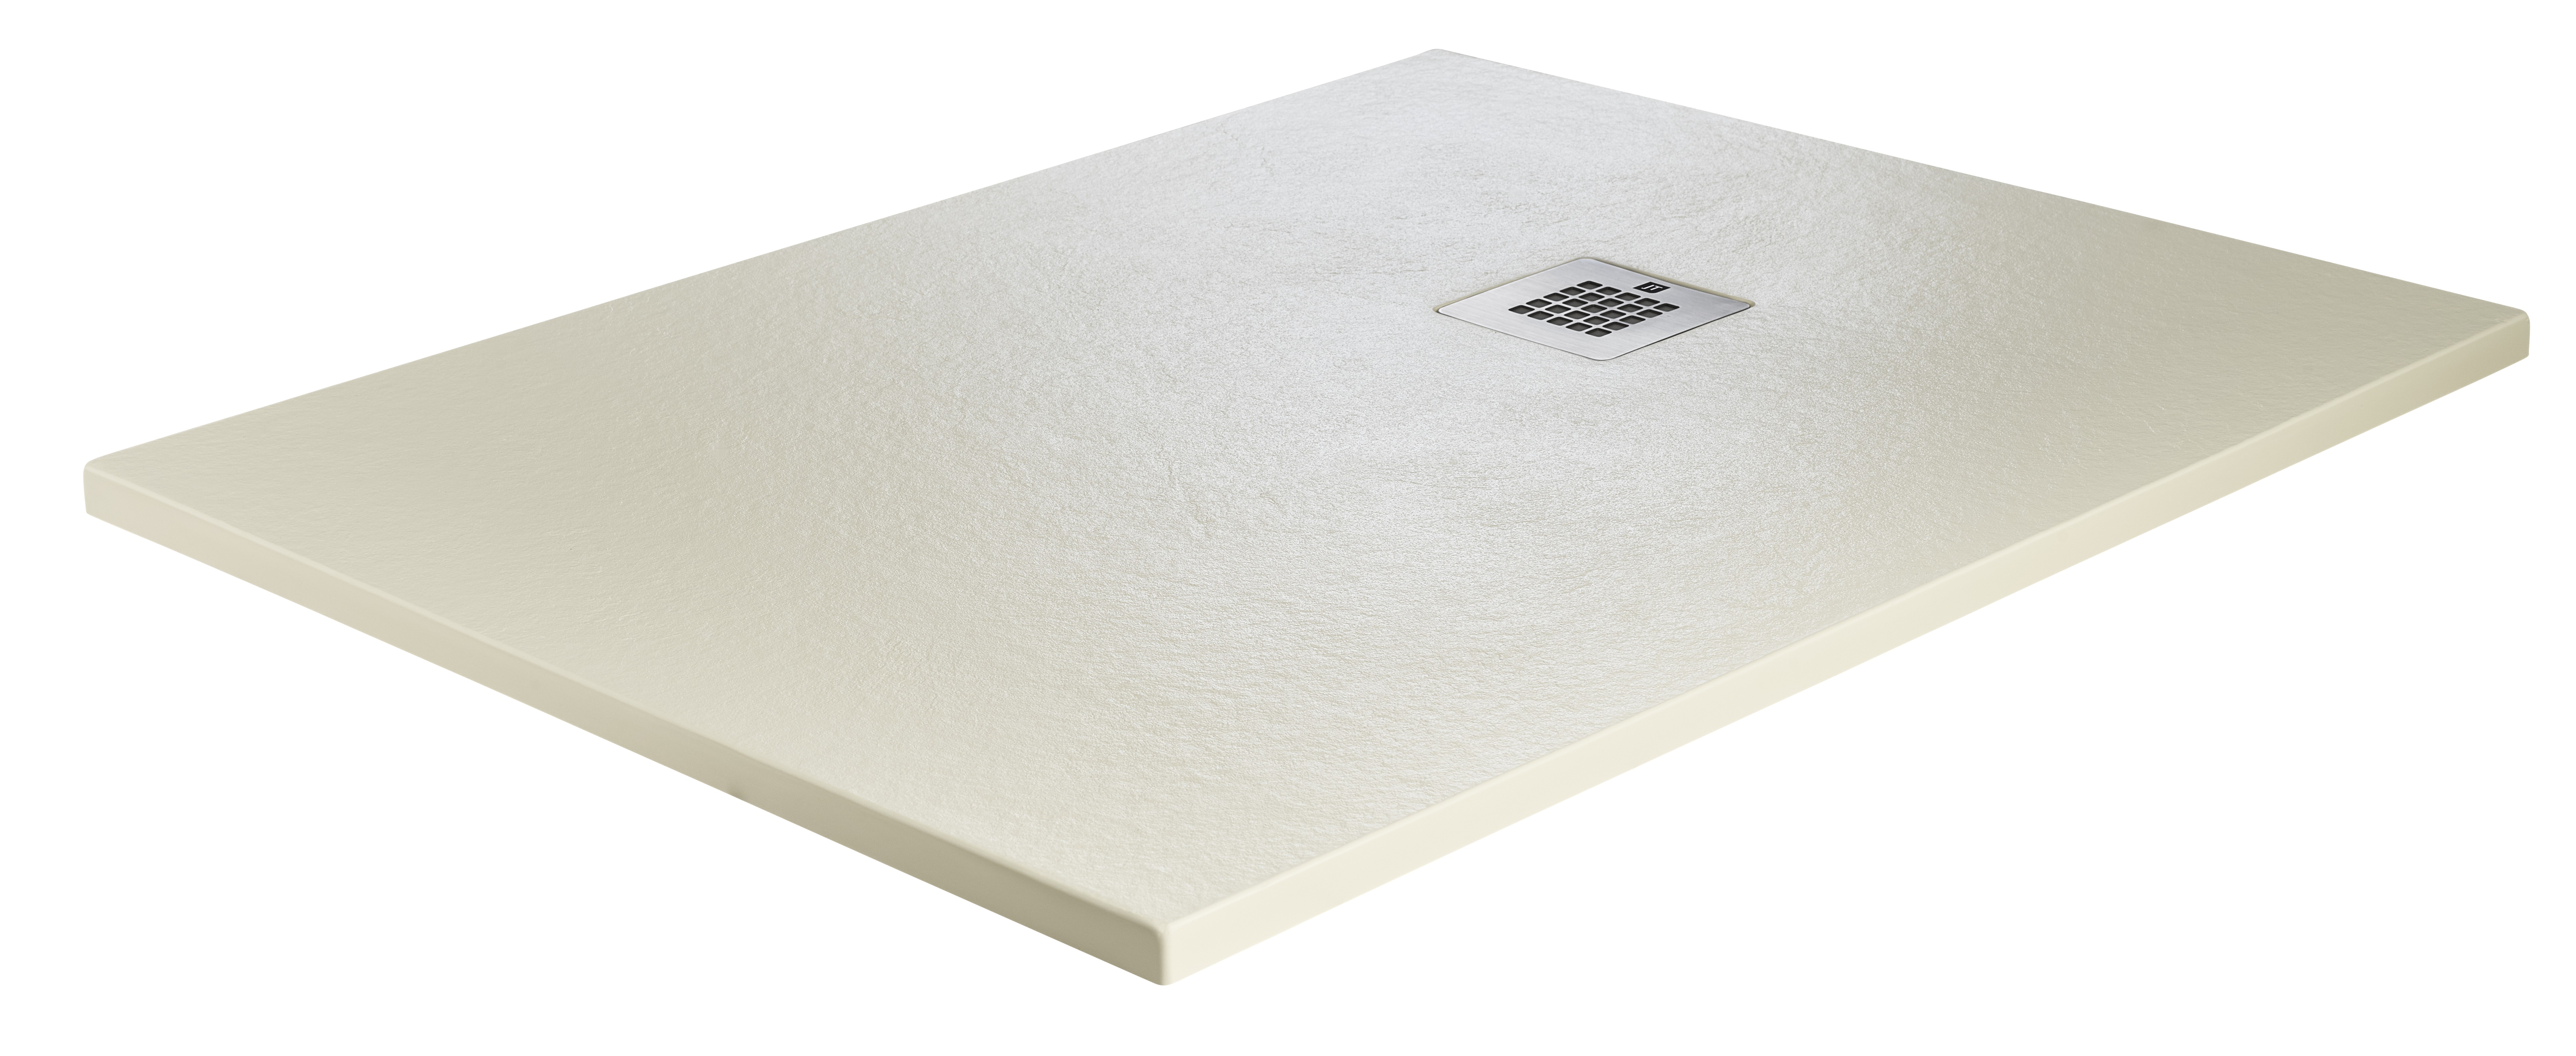 Just Trays Natural Flat to Floor Square Shower Tray 900mm Runswick Cream (Only Image Currently Available) [NTL90011]